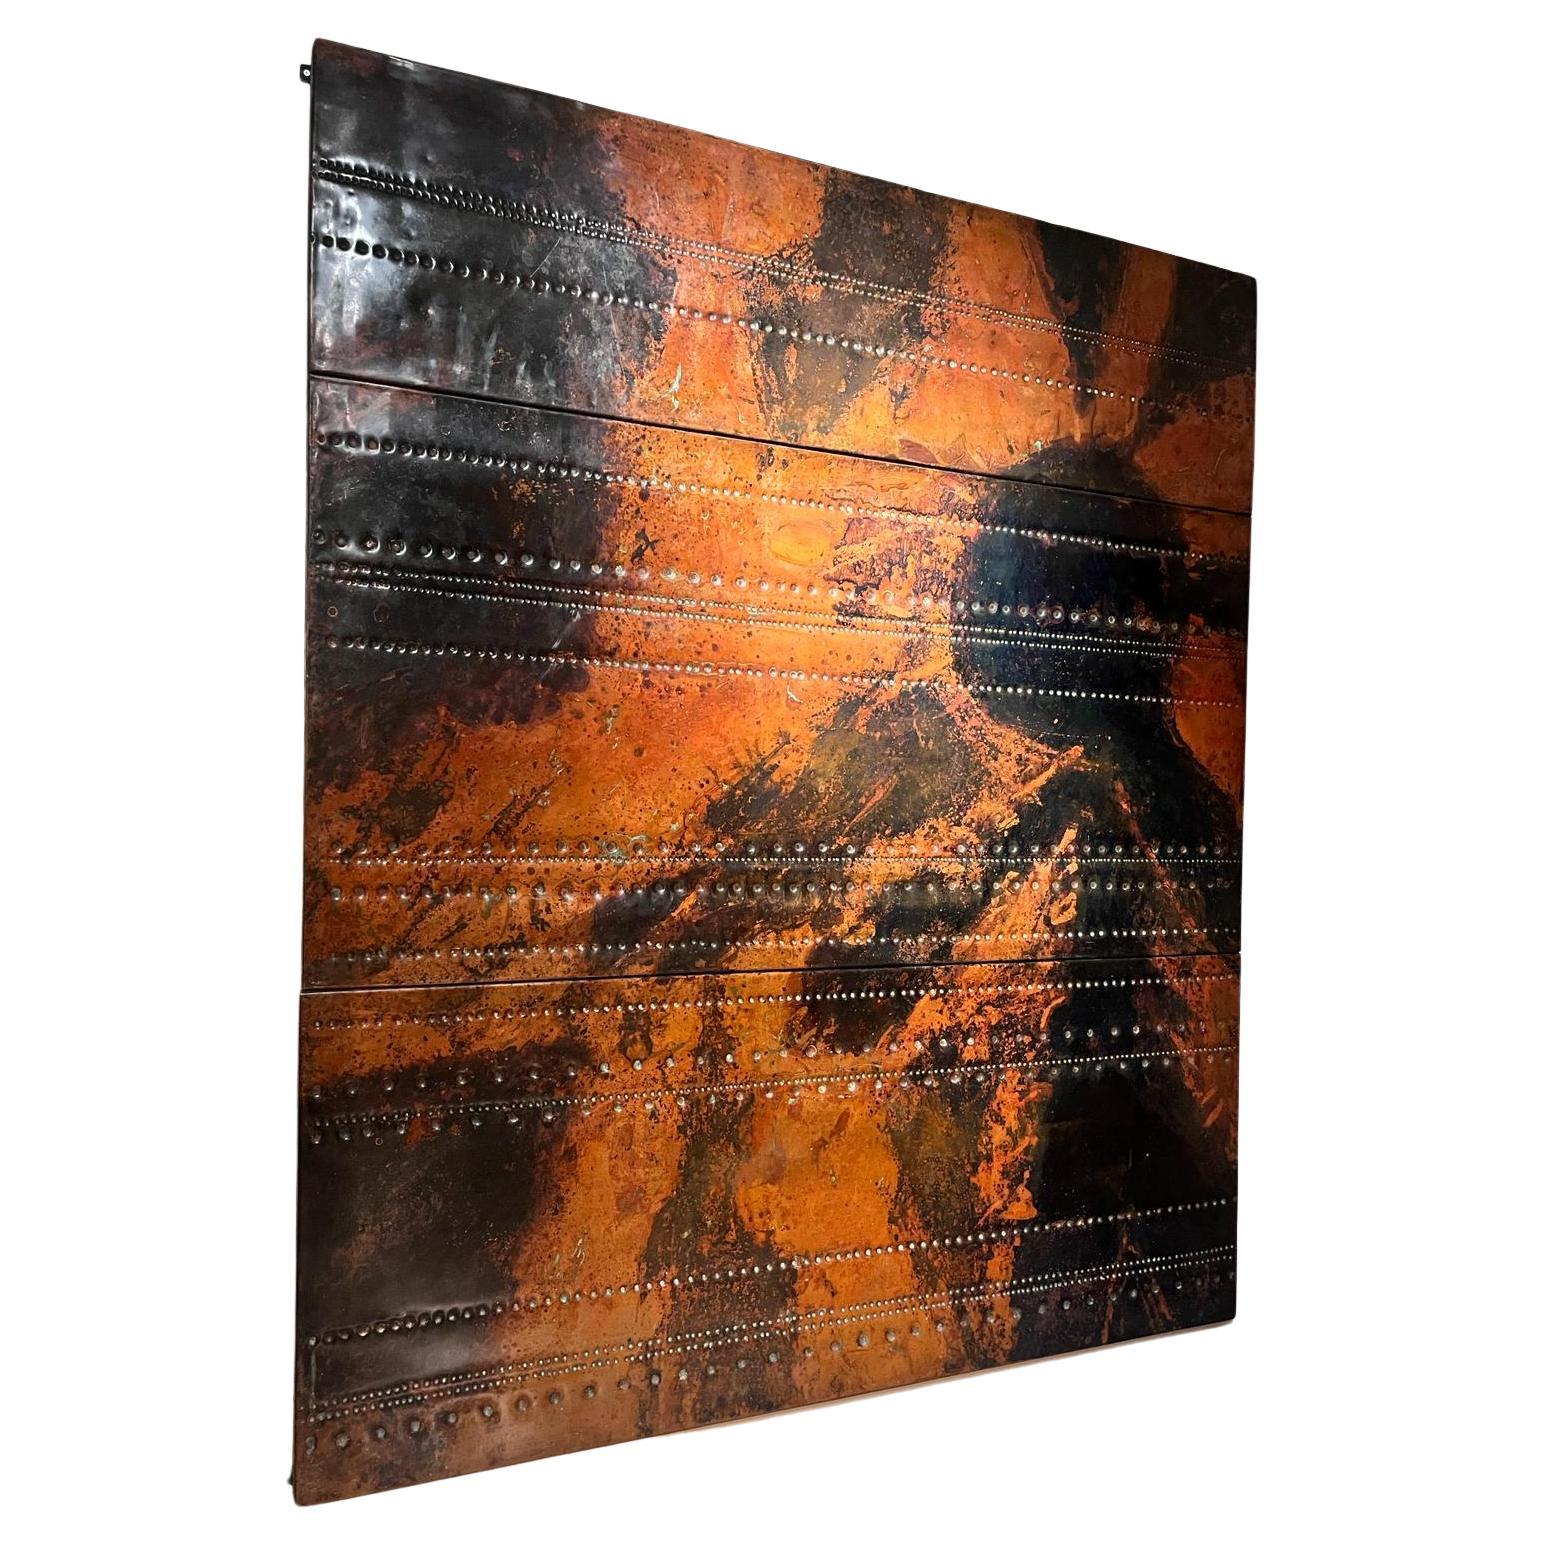 Hammered copper panel treated with acid by Pierre Sabatier 